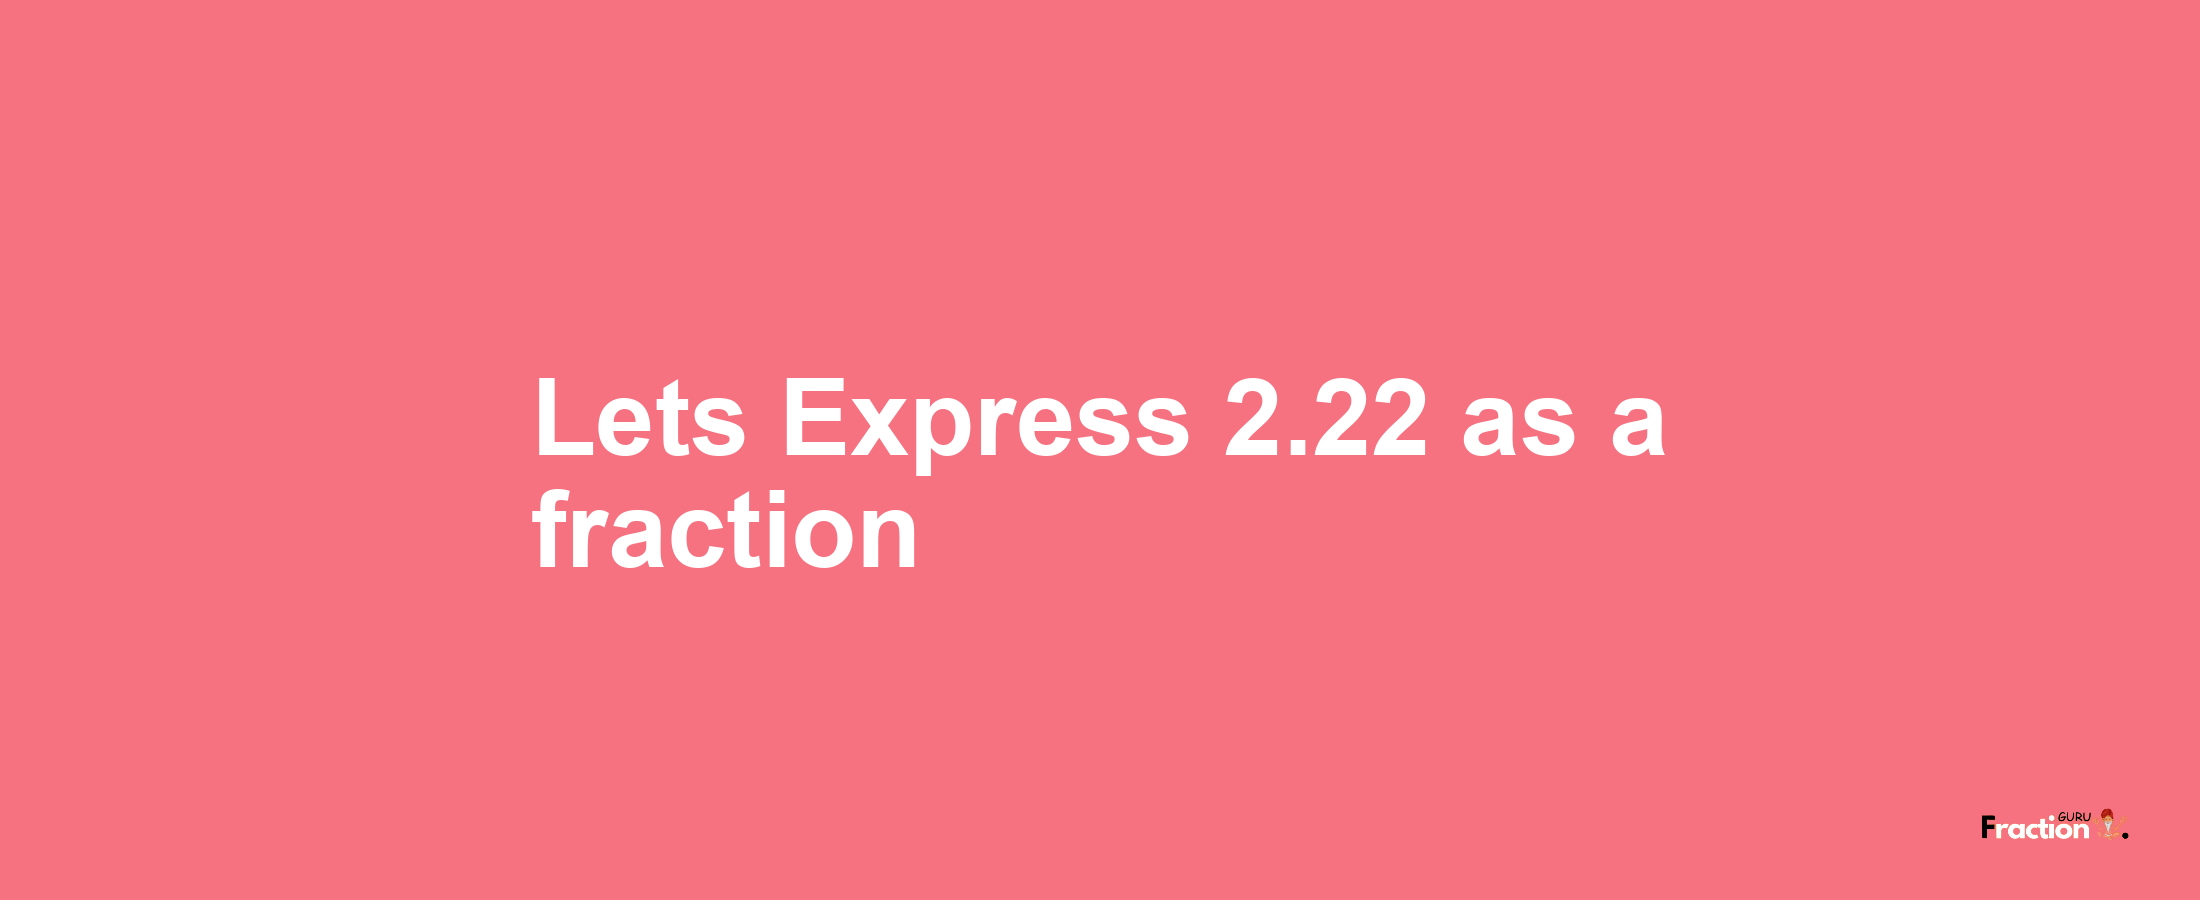 Lets Express 2.22 as afraction